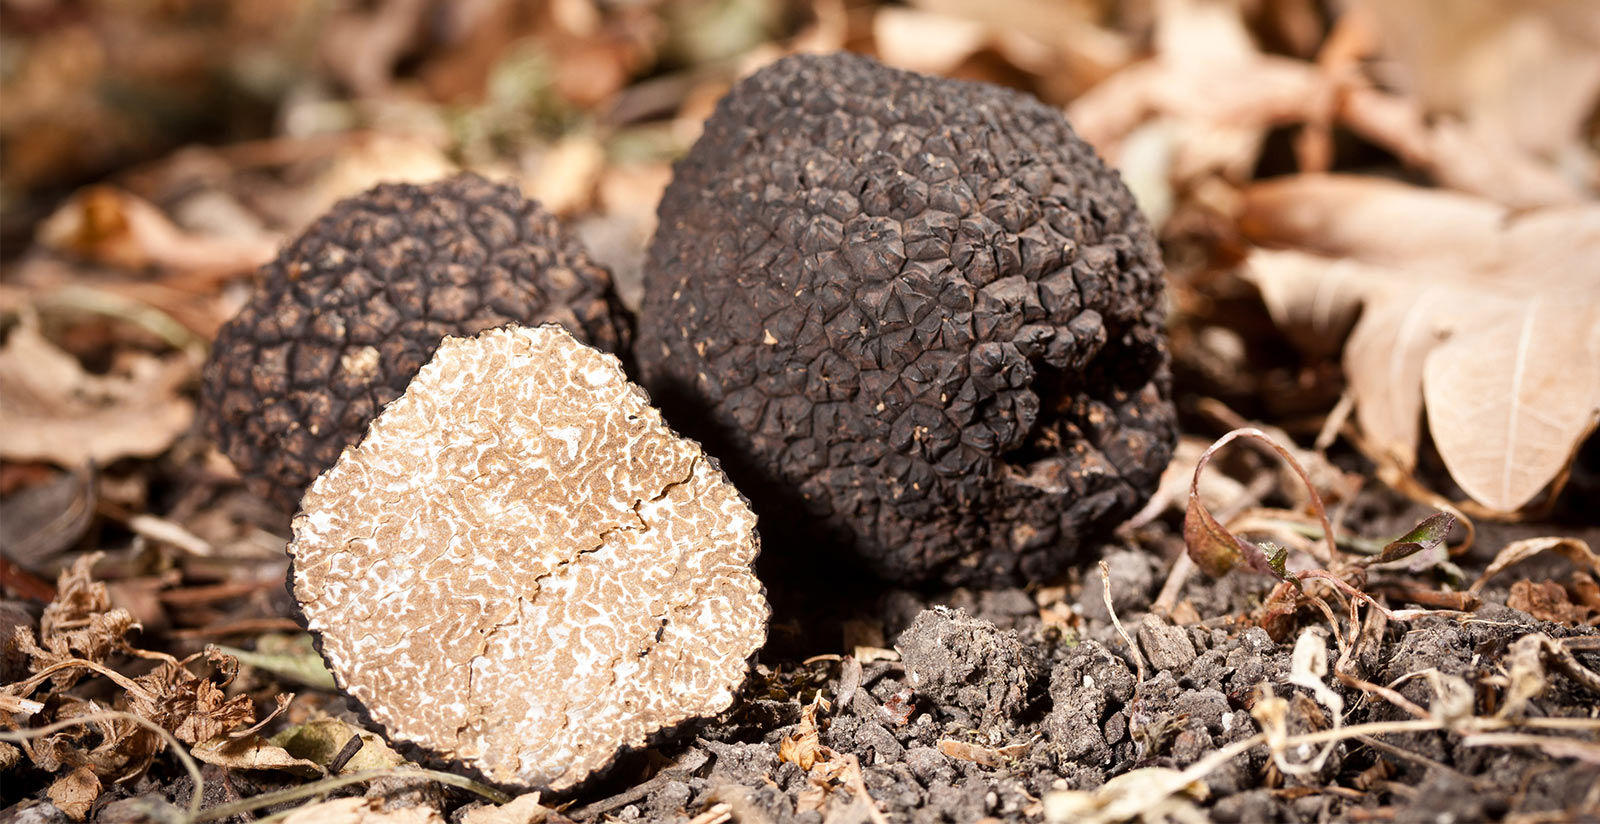 Grand Hotel Imperiale - Truffle Hunt in Tuscany 1